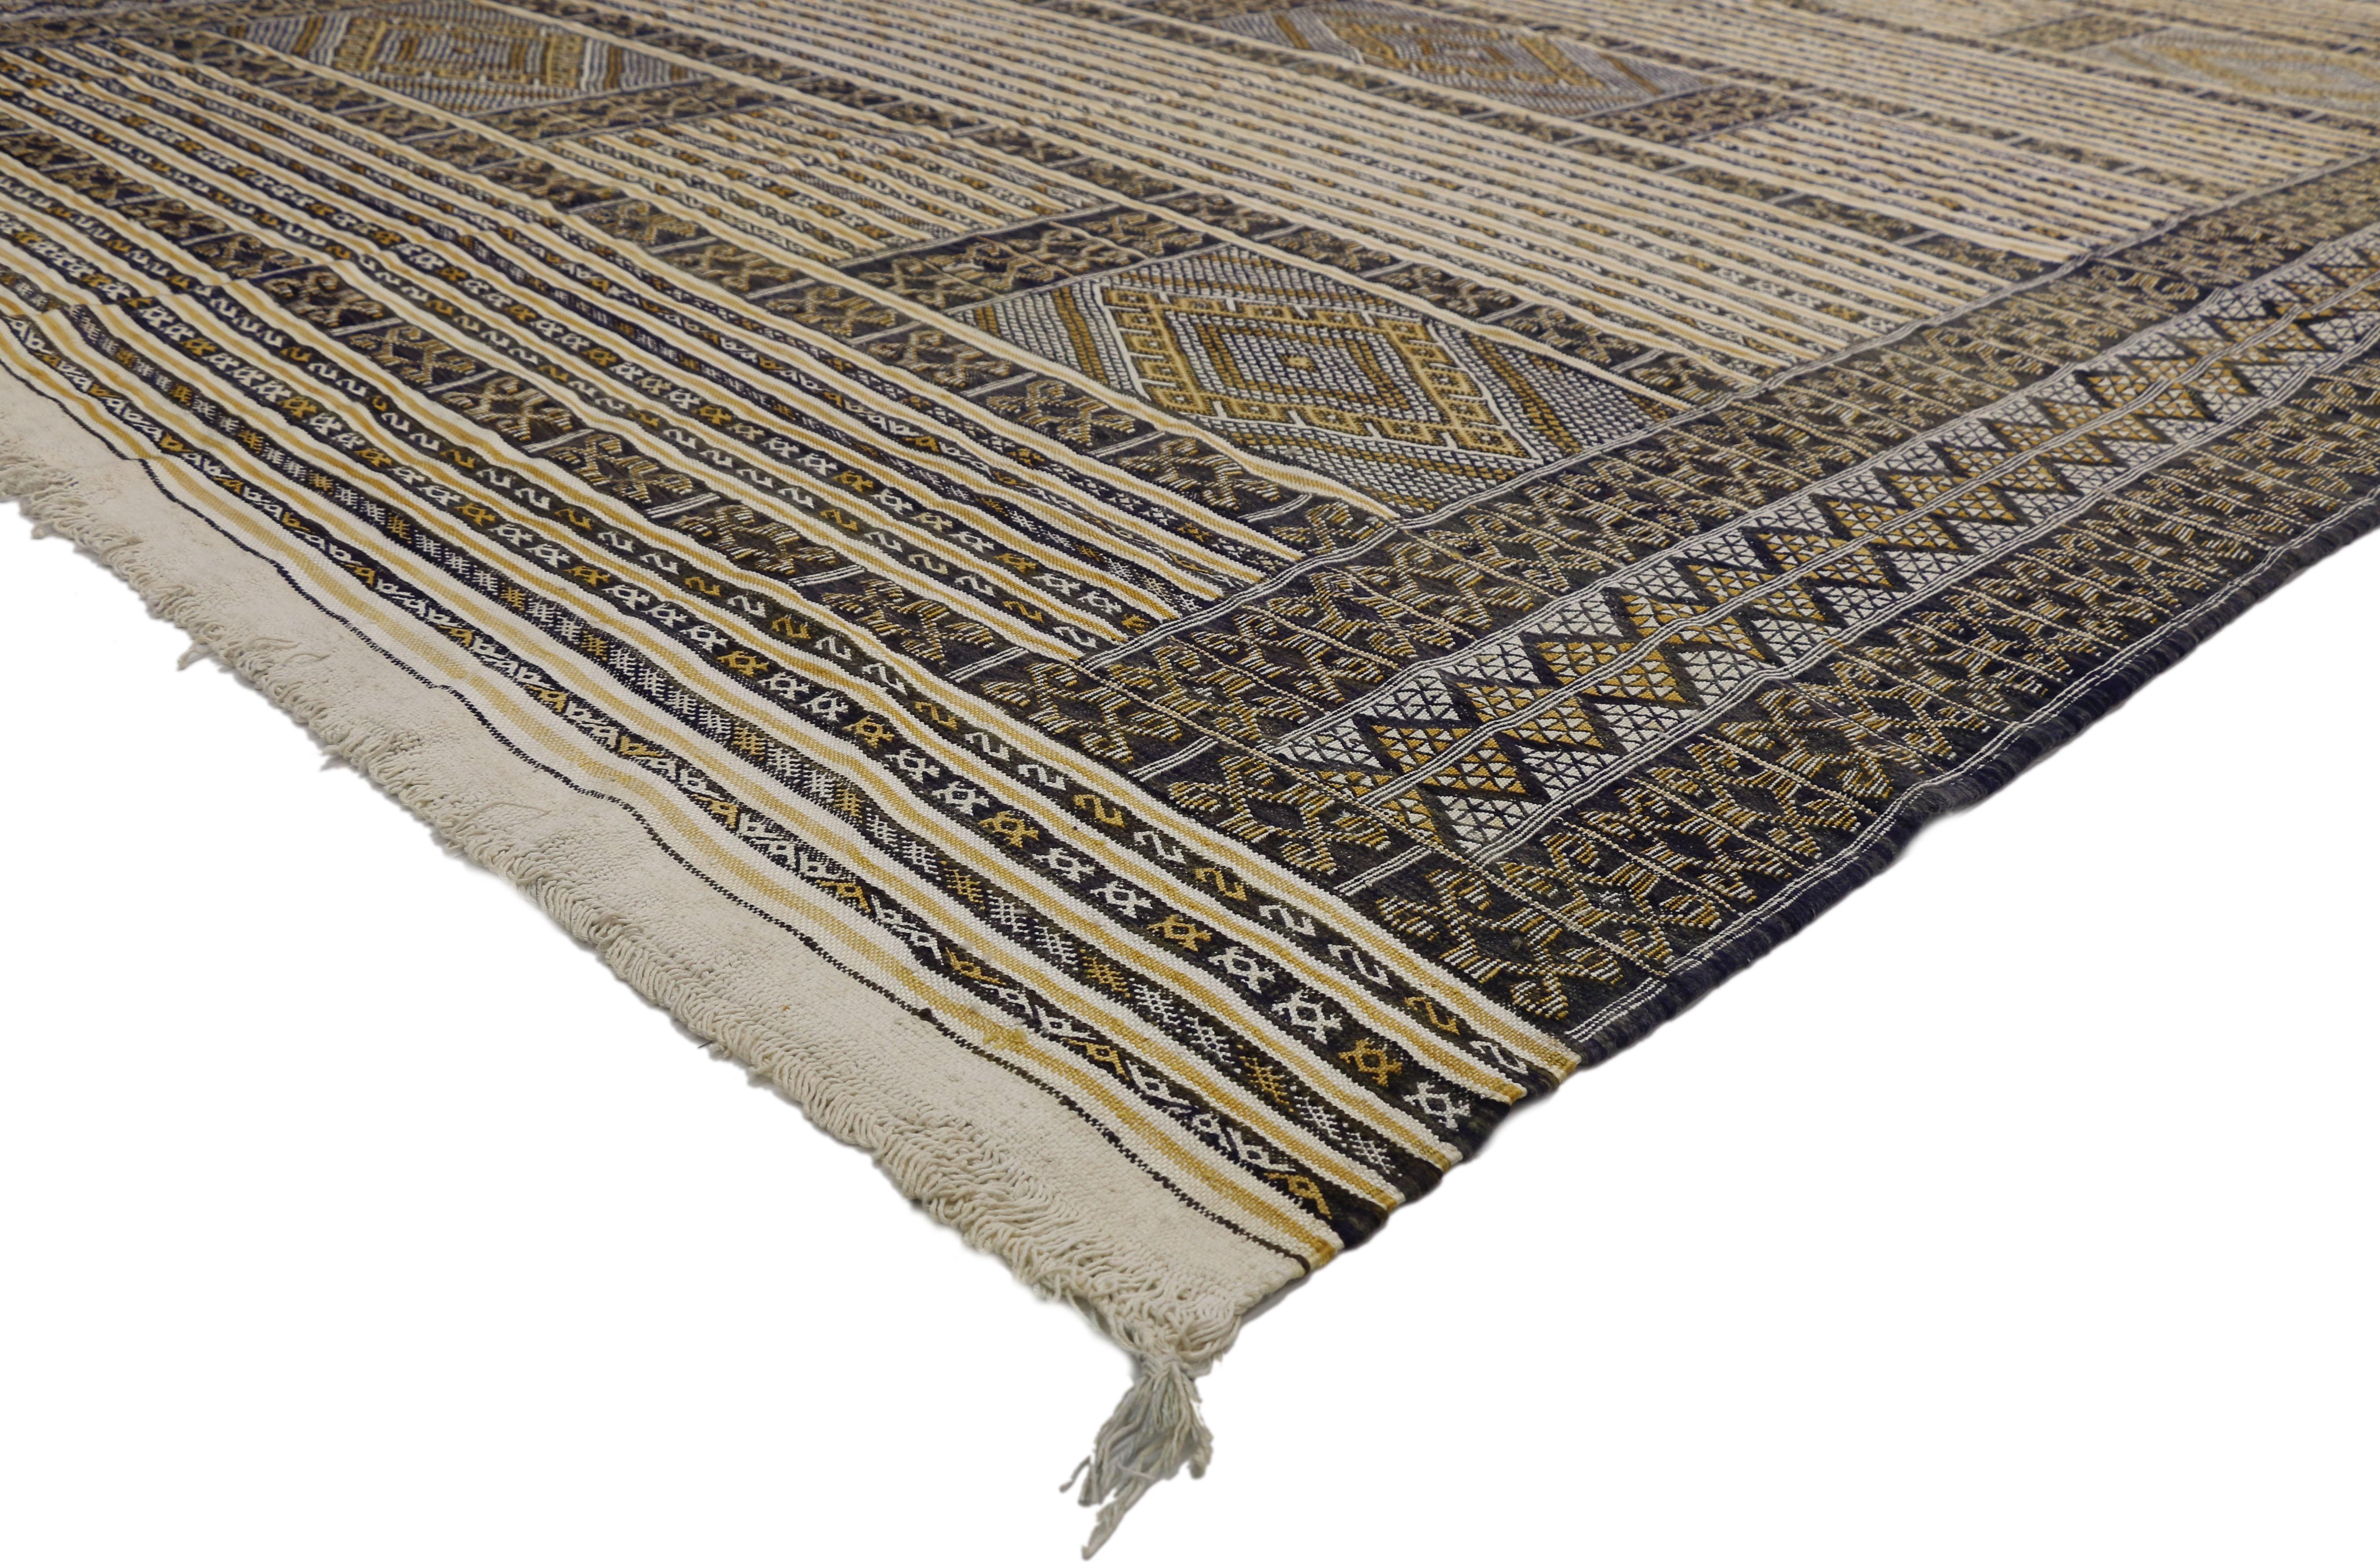 20885 Vintage Moroccan Zemmour Berber Area Rug with Modern Tribal Style 09'01 x 12'11. This handwoven wool vintage Moroccan Zemmour Berber Kilim rug features an all-over geometric pattern. It beautifully displays seven alternating rows of wide bands